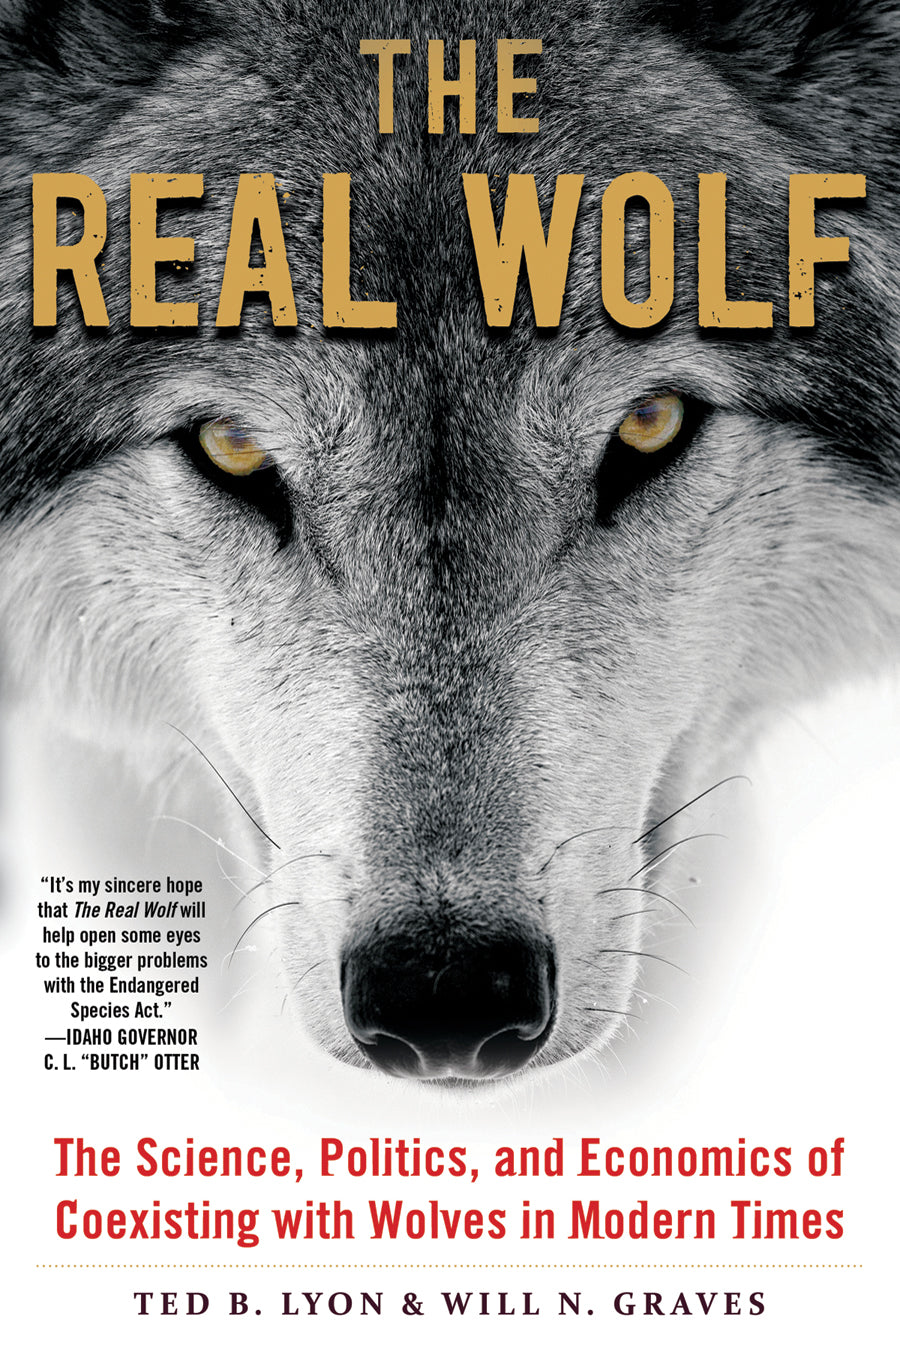 THE REAL WOLF: THE SCIENCE, POLITICS, AND ECONOMICS OF COEXISTING WITH WOLVES IN MODERN TIMES